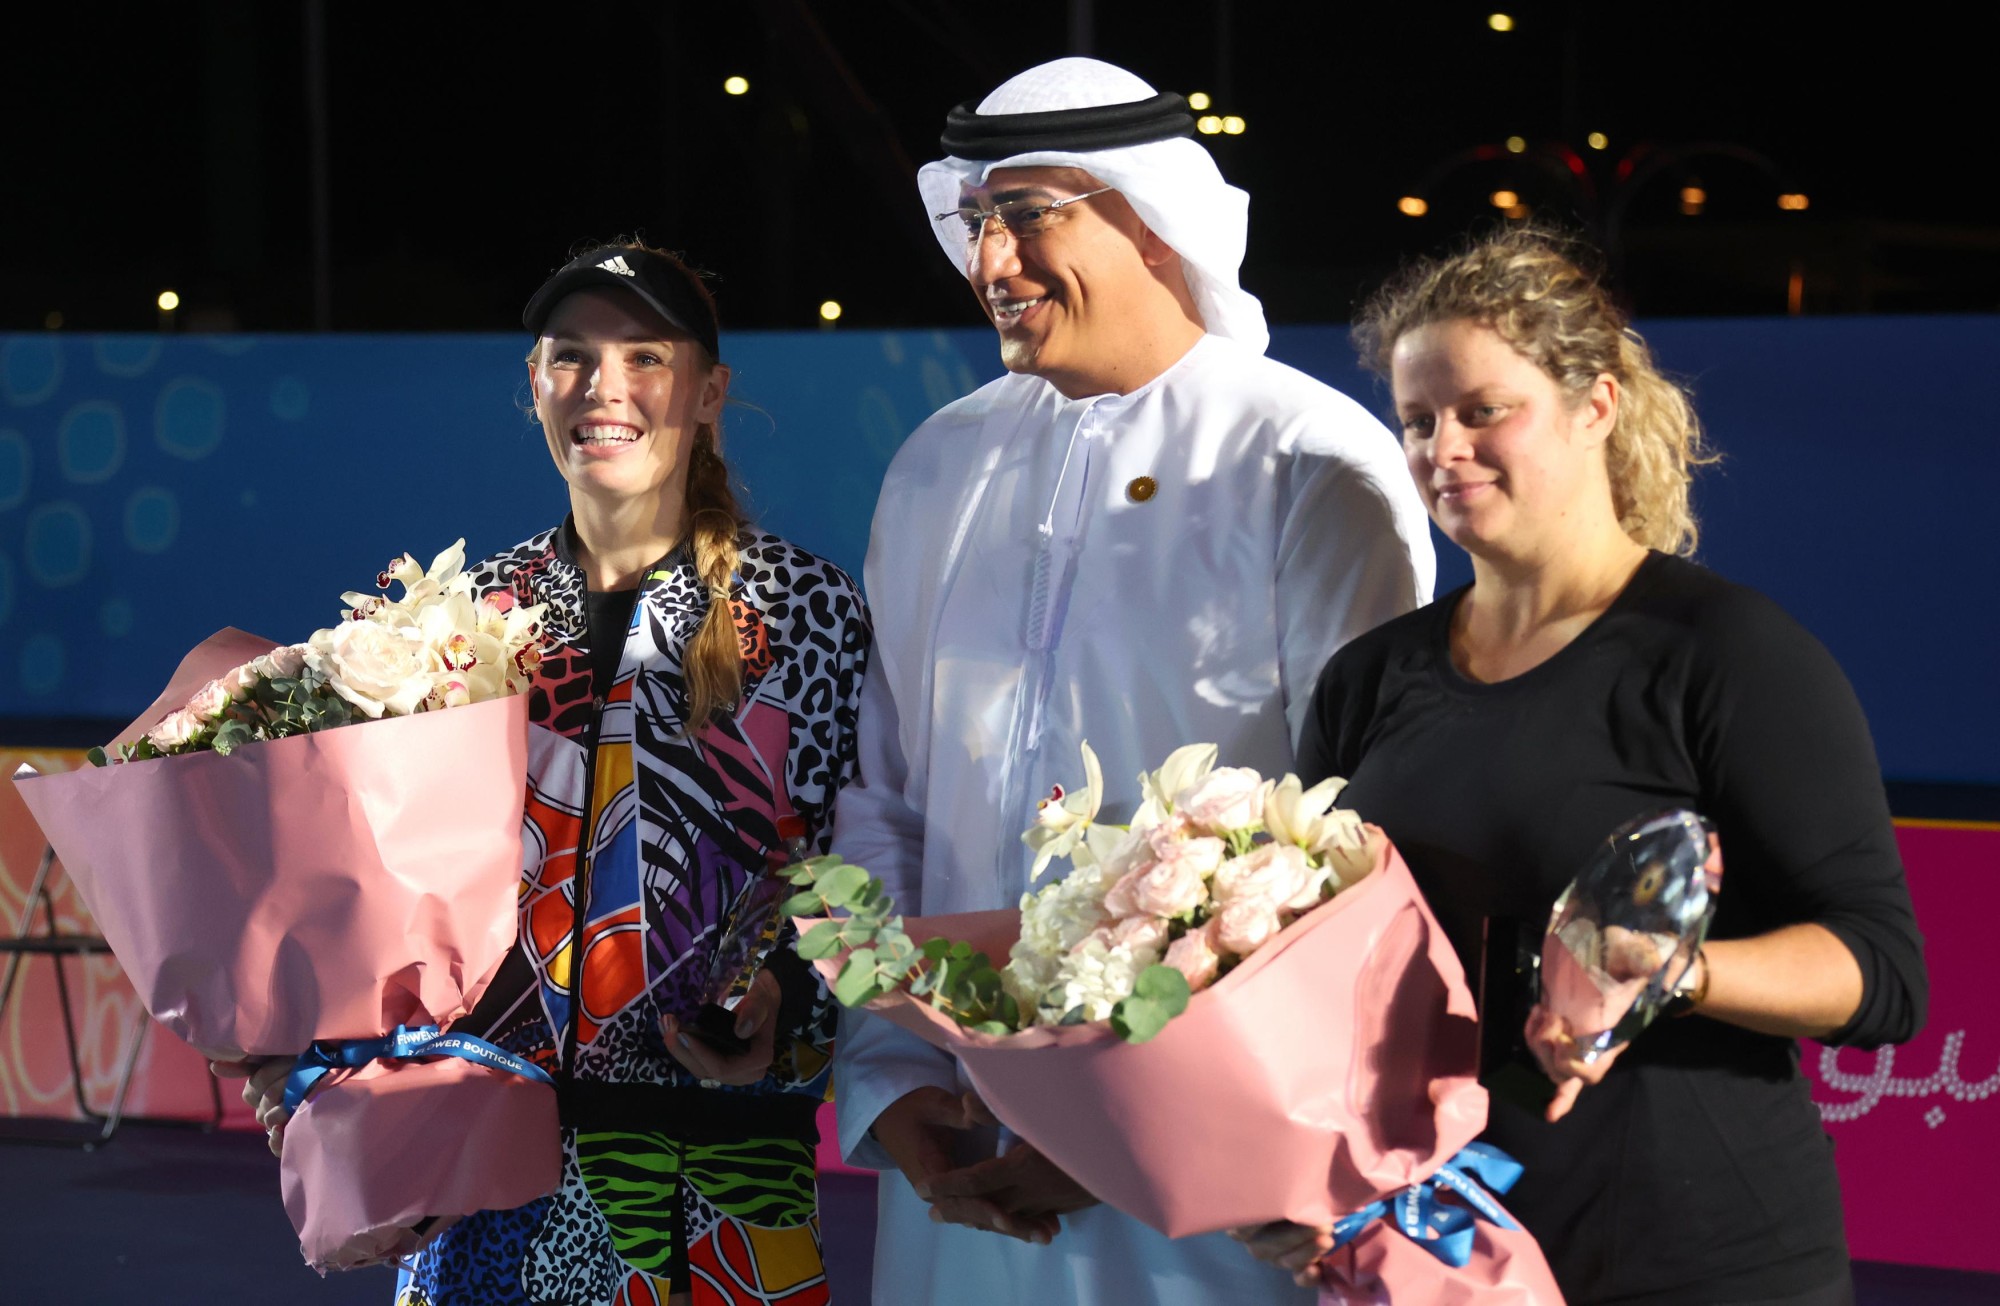 Ahmed Al Khatib (C), Chief Development and Delivery Officer, Expo 2020 alongside Tennis legends and Women’s Singles Exhibition Game runner up Caroline Wozniacki (L) and winner Kim Clijsters (R) during Expo 2020 Dubai Tennis Week at the Exp